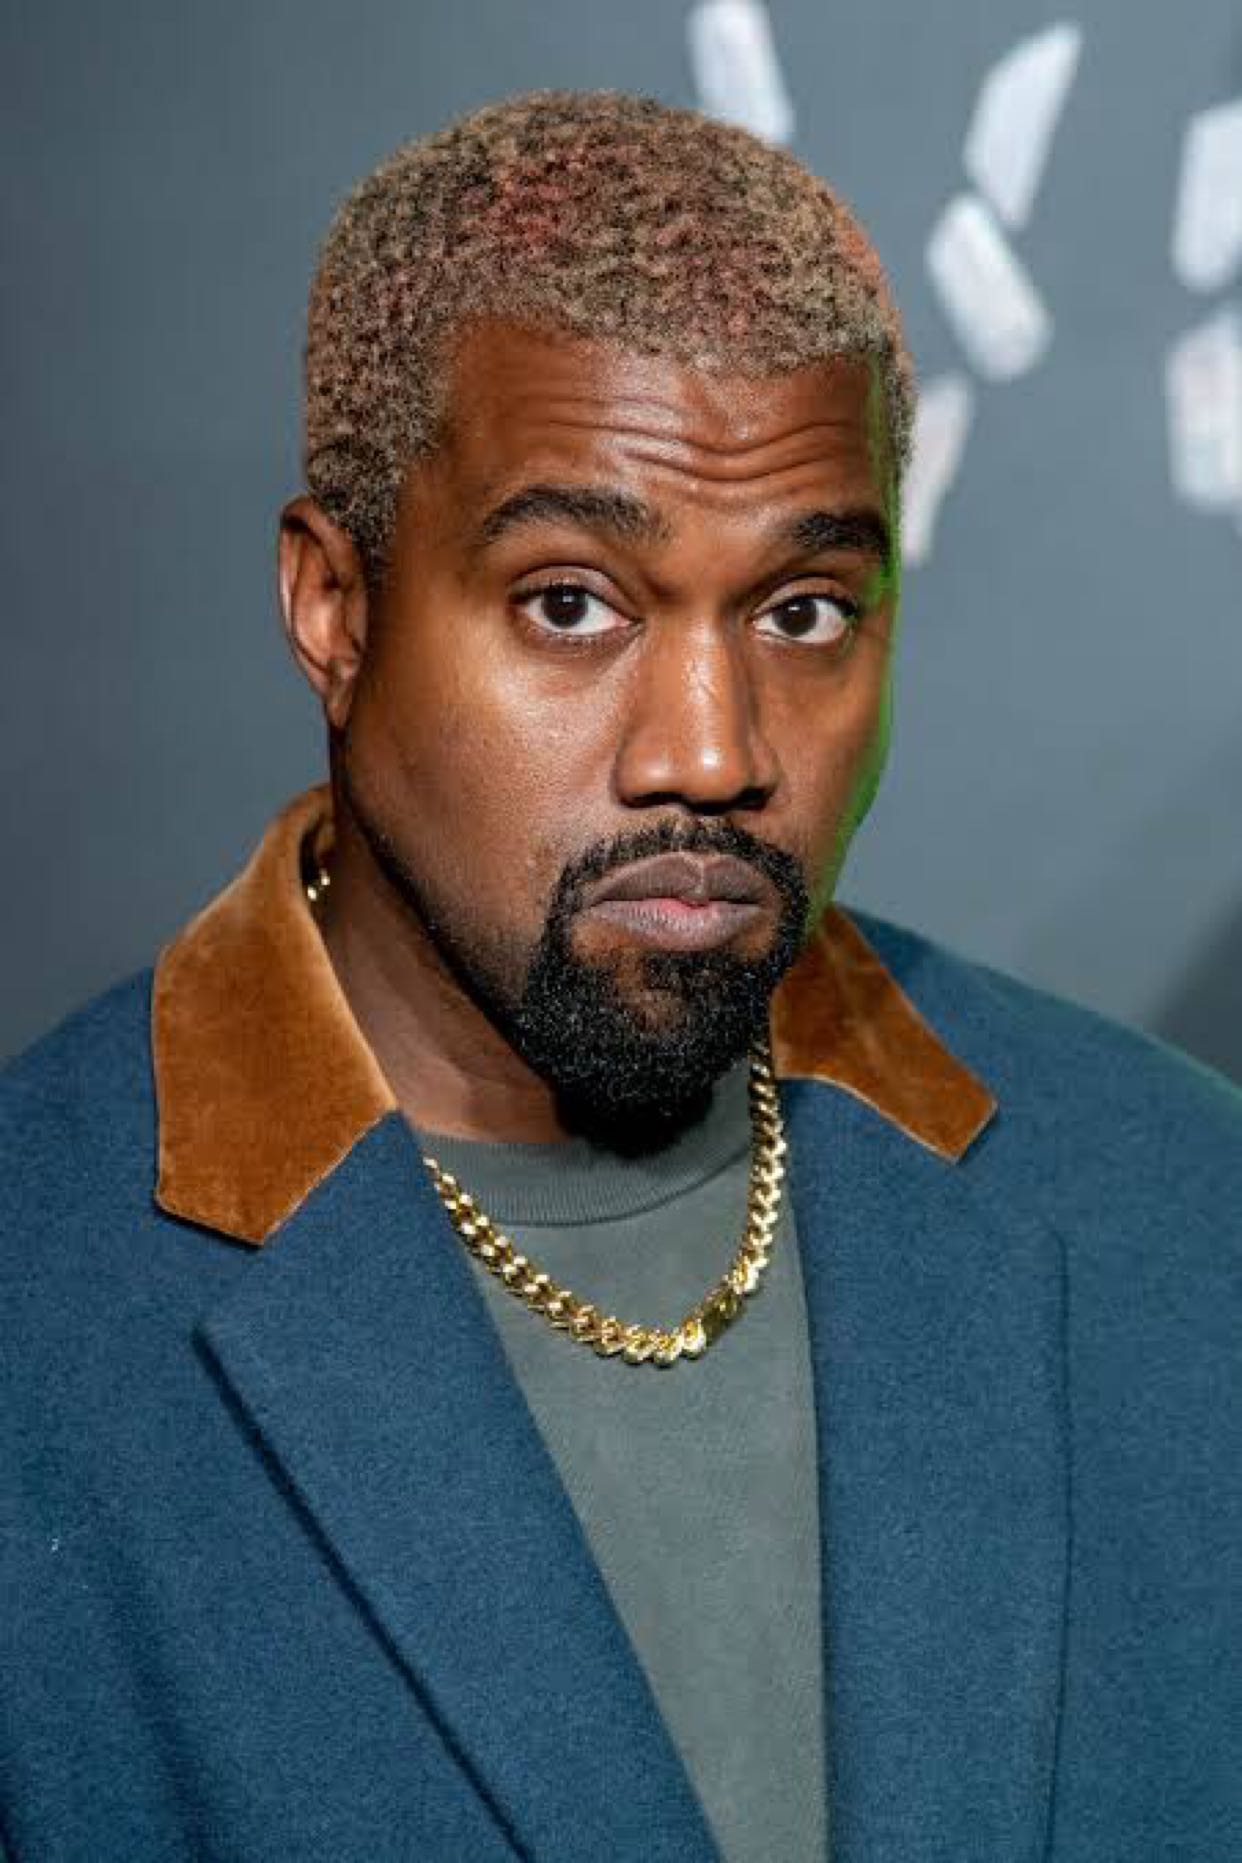 Who Goes For An Event And Refuses To Leave The Venue? - Only Kanye West